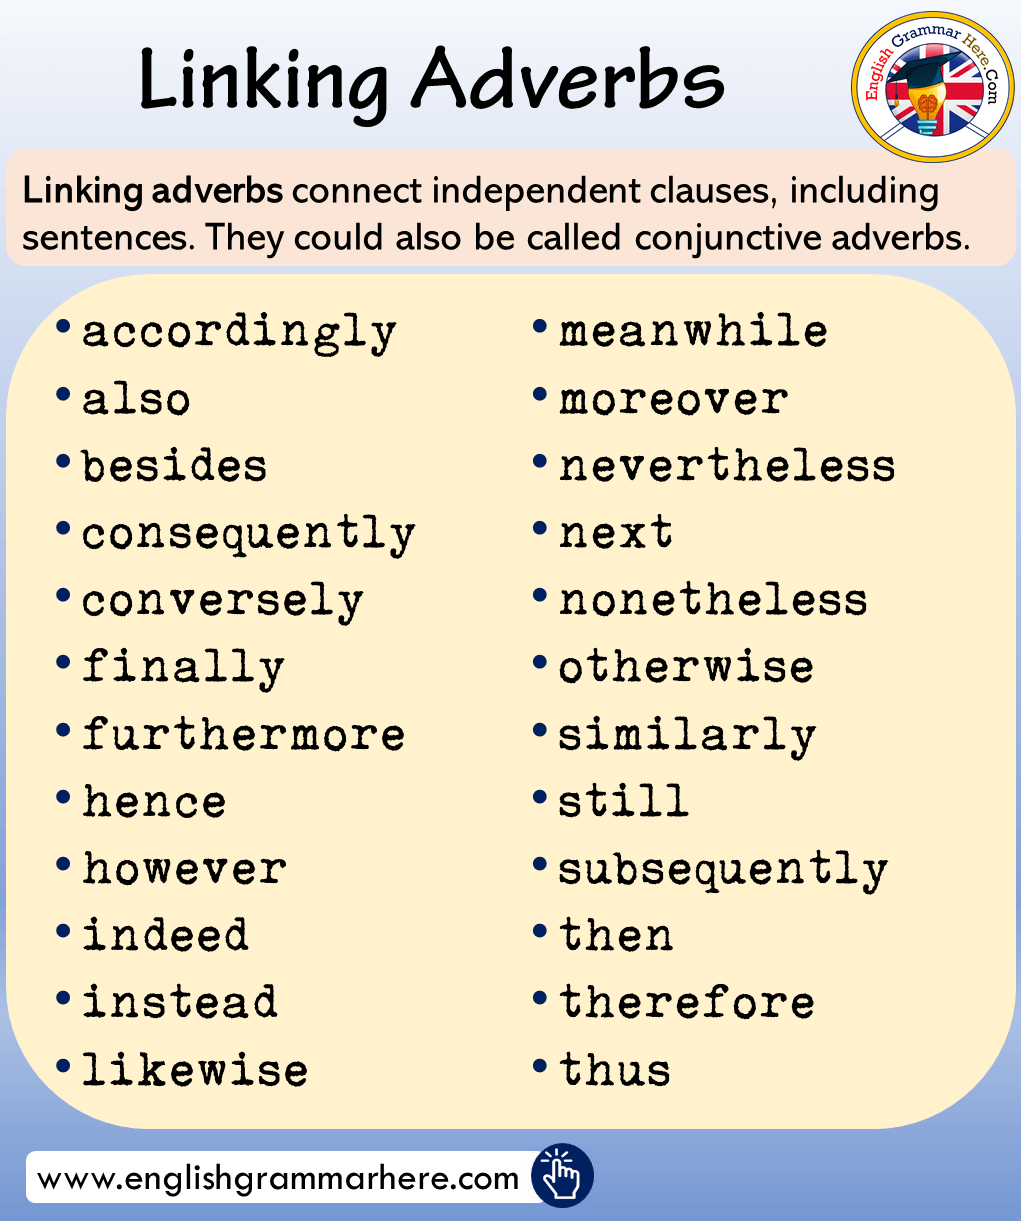 Linking Adverbs and Transition Words